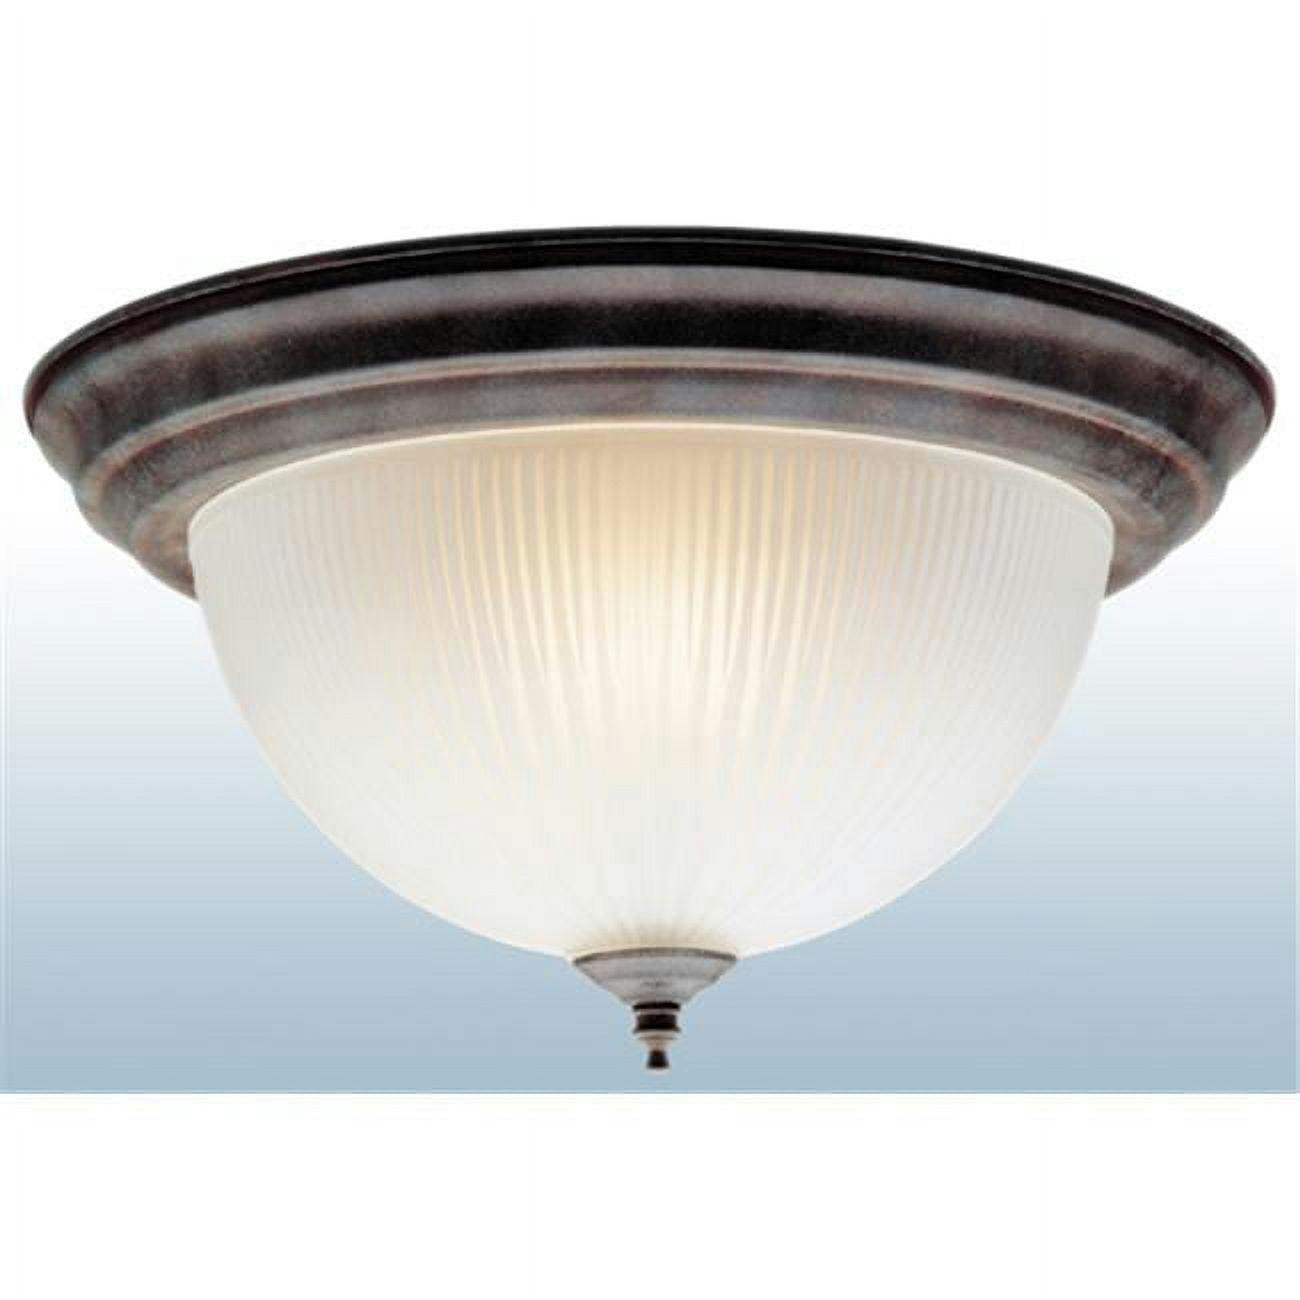 Elegant 14" Frosted Glass LED Ceiling Light Fixture